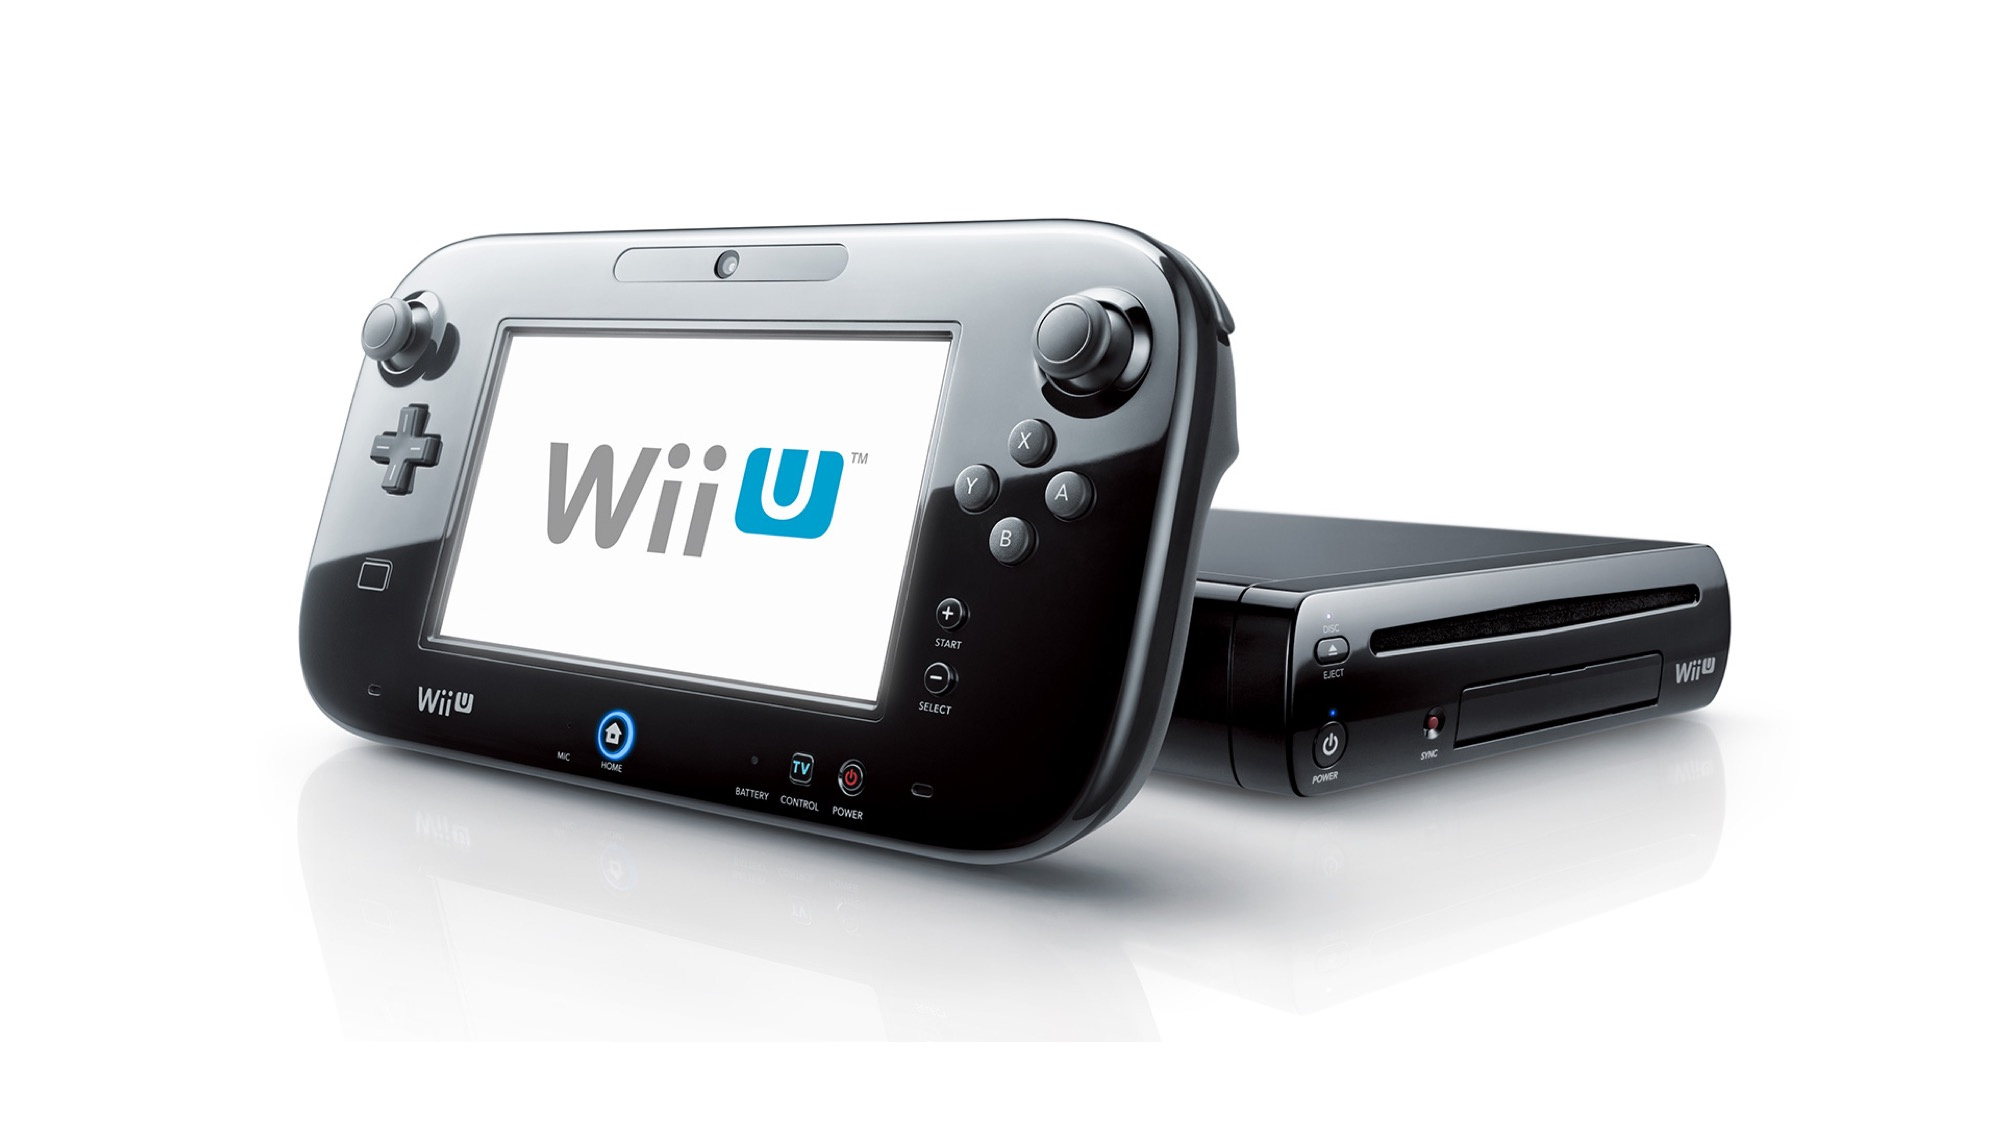 wii top selling games